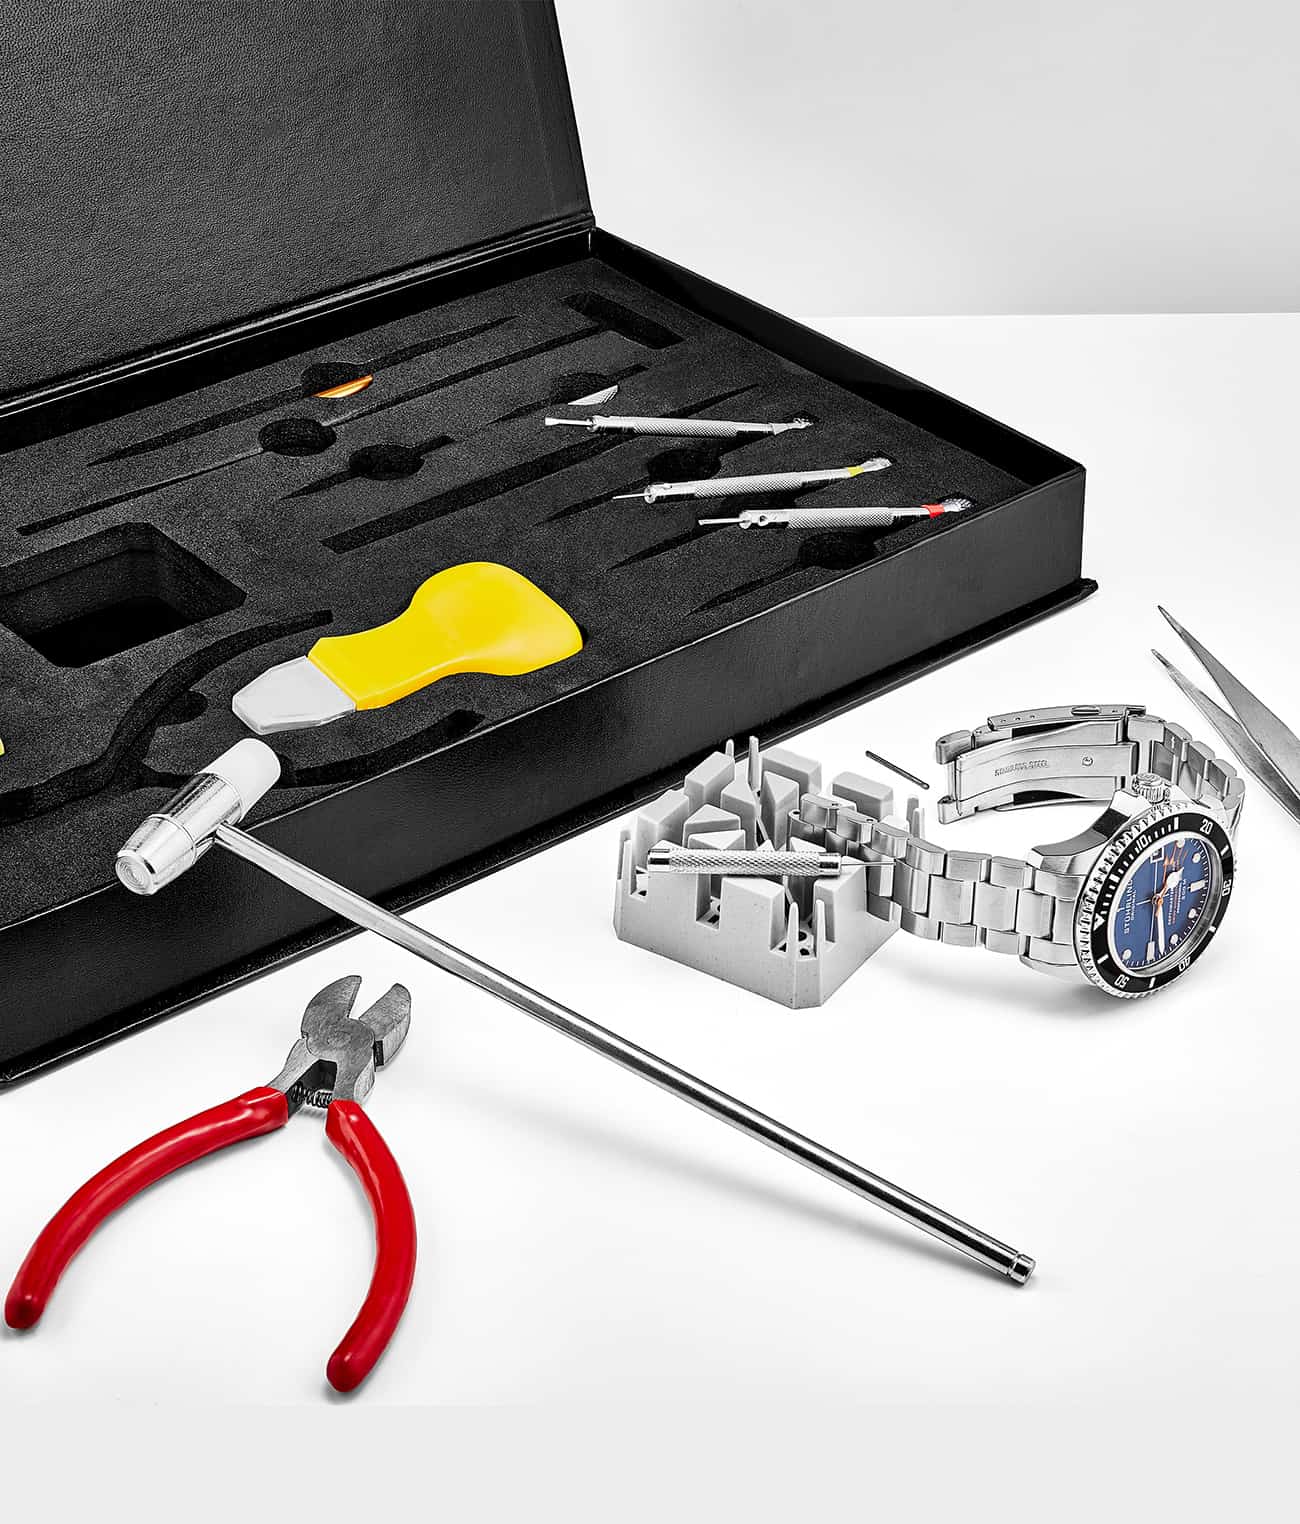 Presidia 943A.03, Sion 1001.01 Signature Pen, and Watch Tool Kit